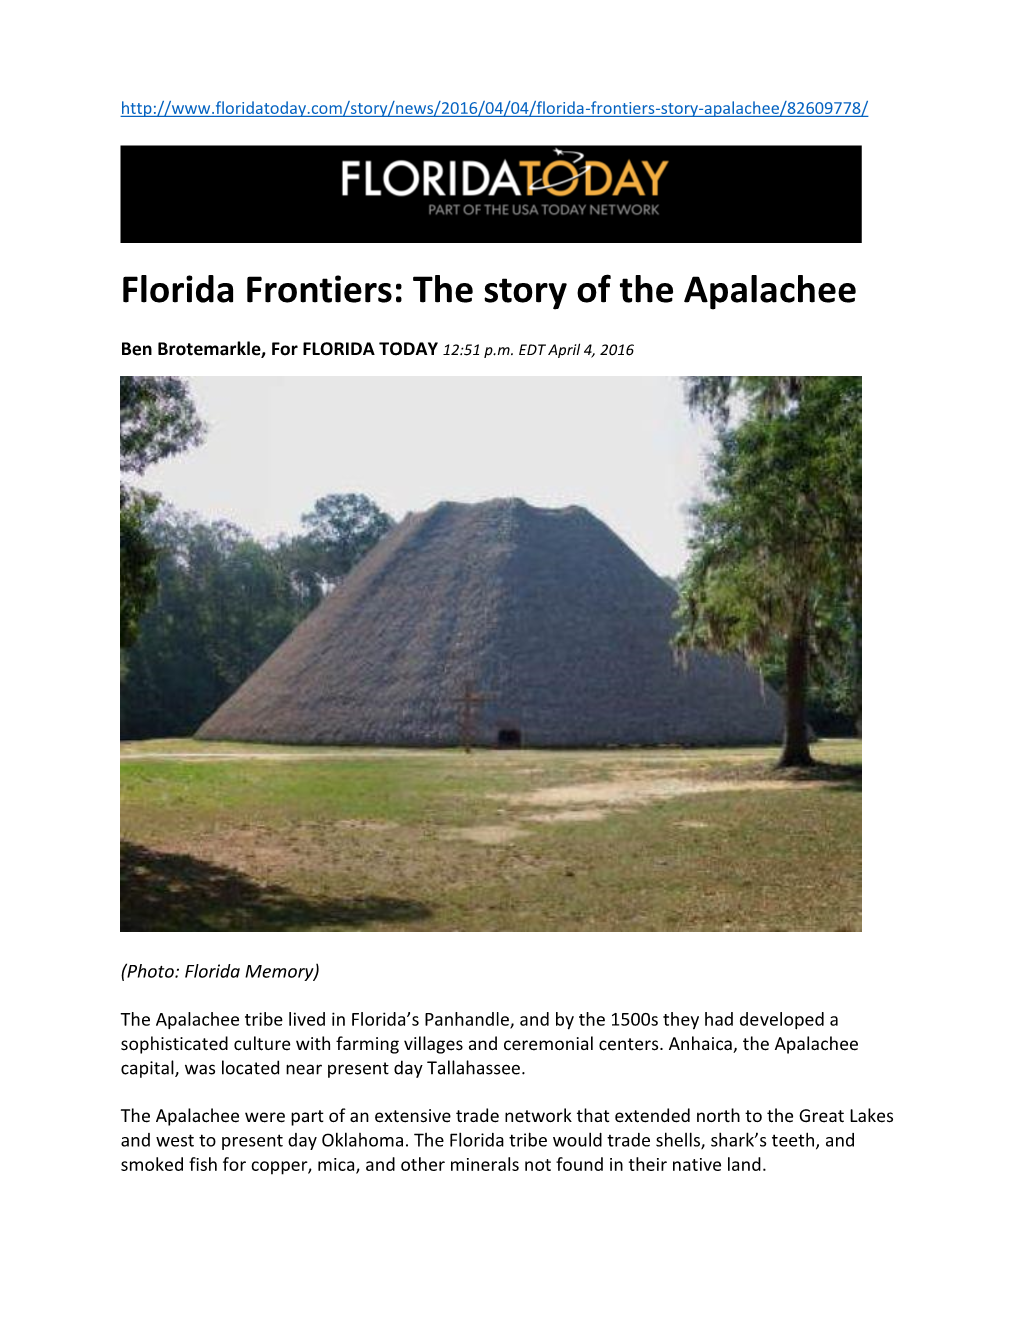 Florida Frontiers: the Story of the Apalachee Florida Frontiers: the Story of the Apalachee